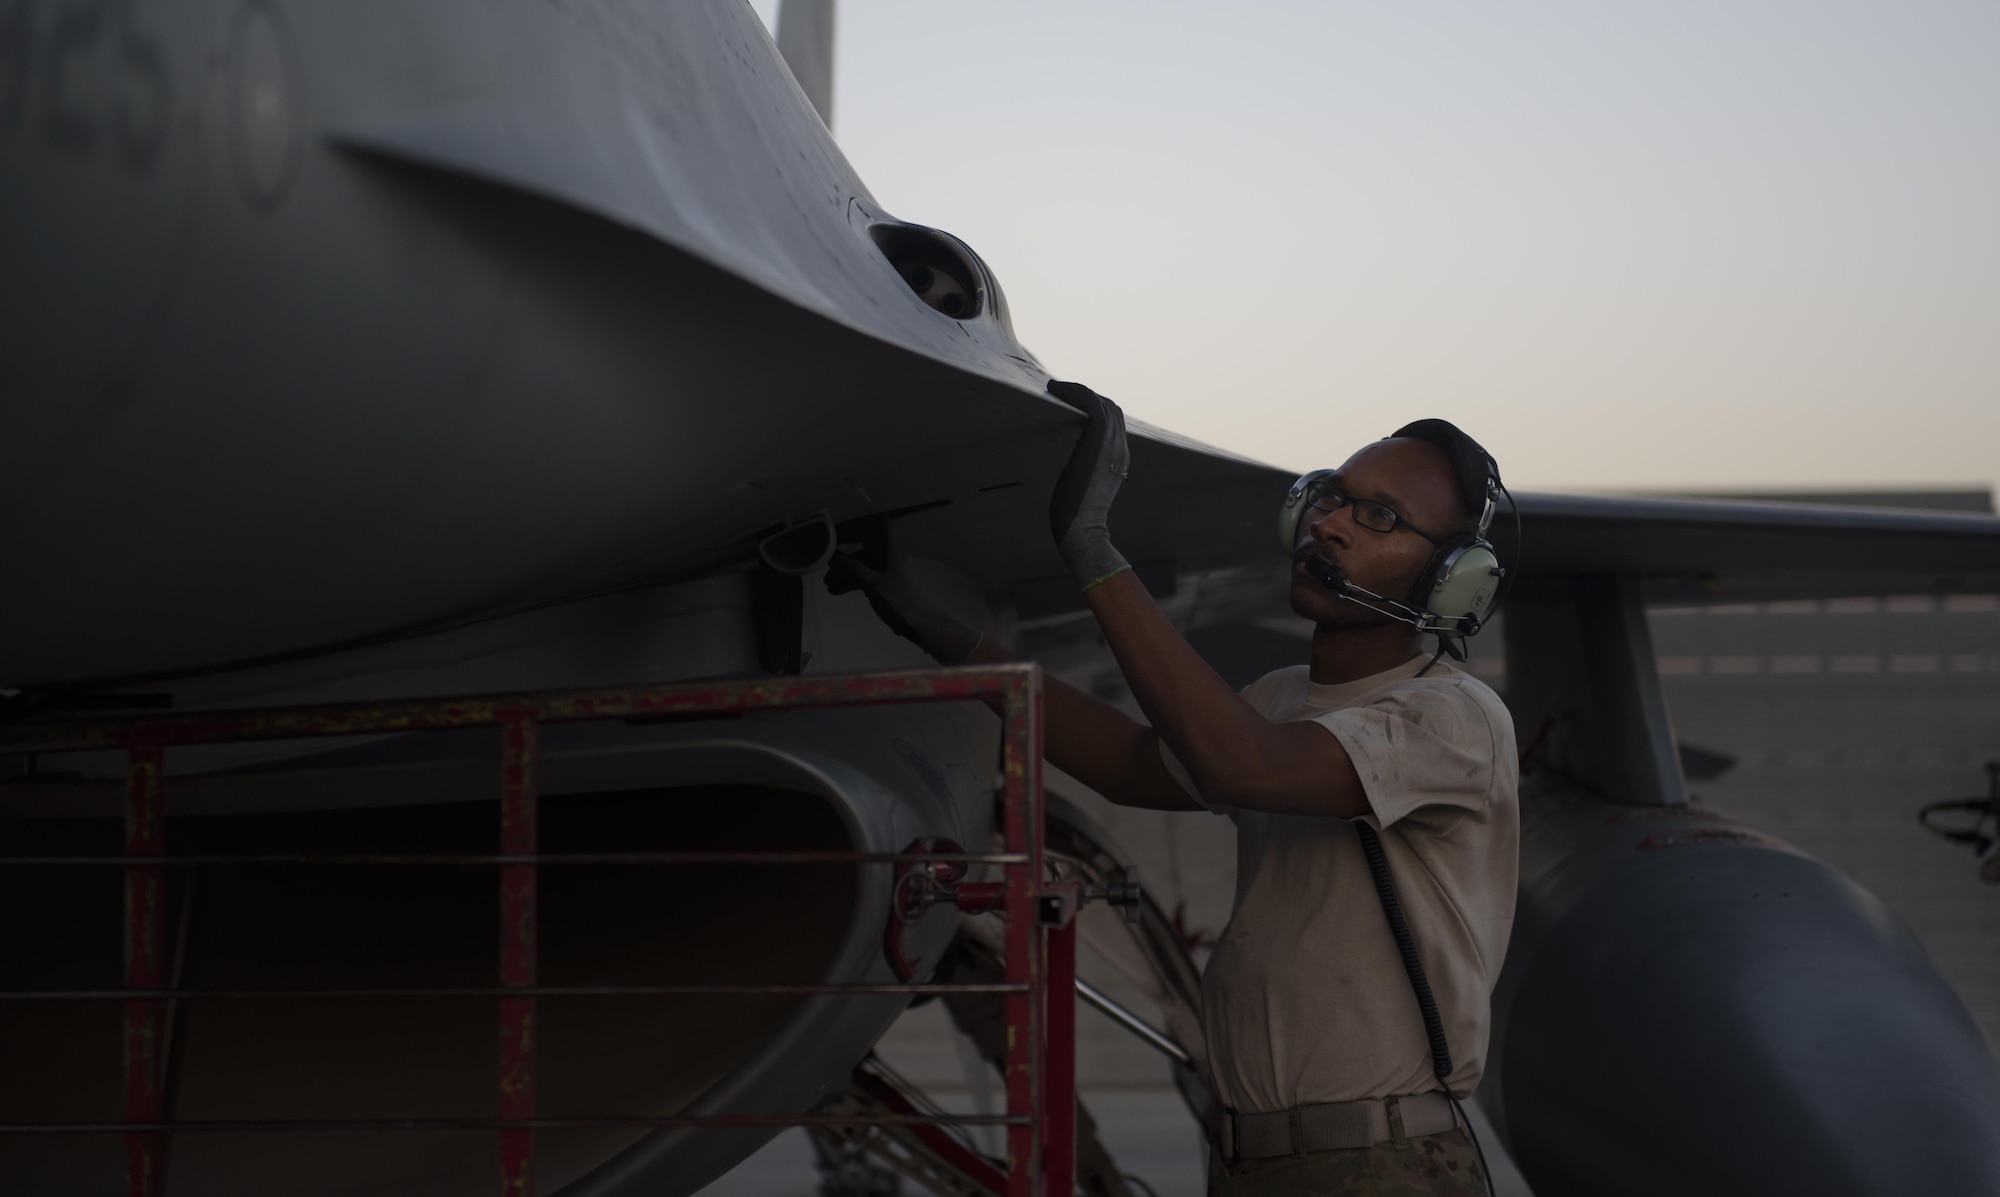 Staff Sgt. Donterrio Erby, a 455th Expeditionary Aircraft Maintenance Squadron aerospace propulsion technician, performs an inspection of an F-16 Fighting Falcon before conducting an afterburner run at Bagram Airfield, Afghanistan, June 16, 2017. Conducting afterburner runs enables maintainers to discover possible problems with the engine that may not be detectable through regular inspections. (U.S. Air Force photo by Staff Sgt. Benjamin Gonsier) 